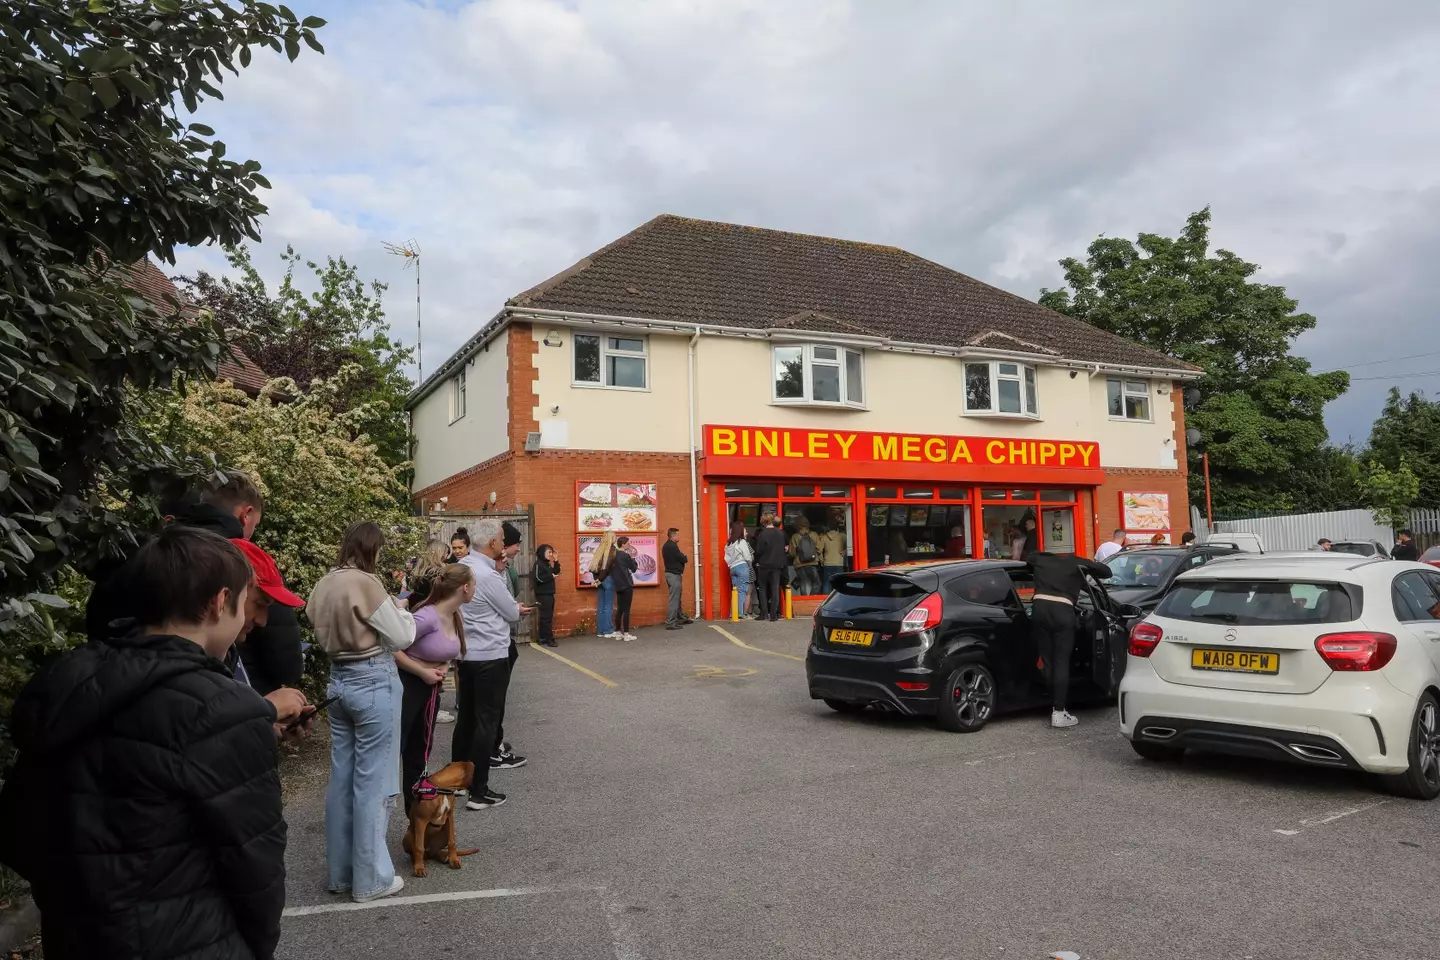 Binley Mega Chippy has attracted huge crowds since going viral on TikTok.